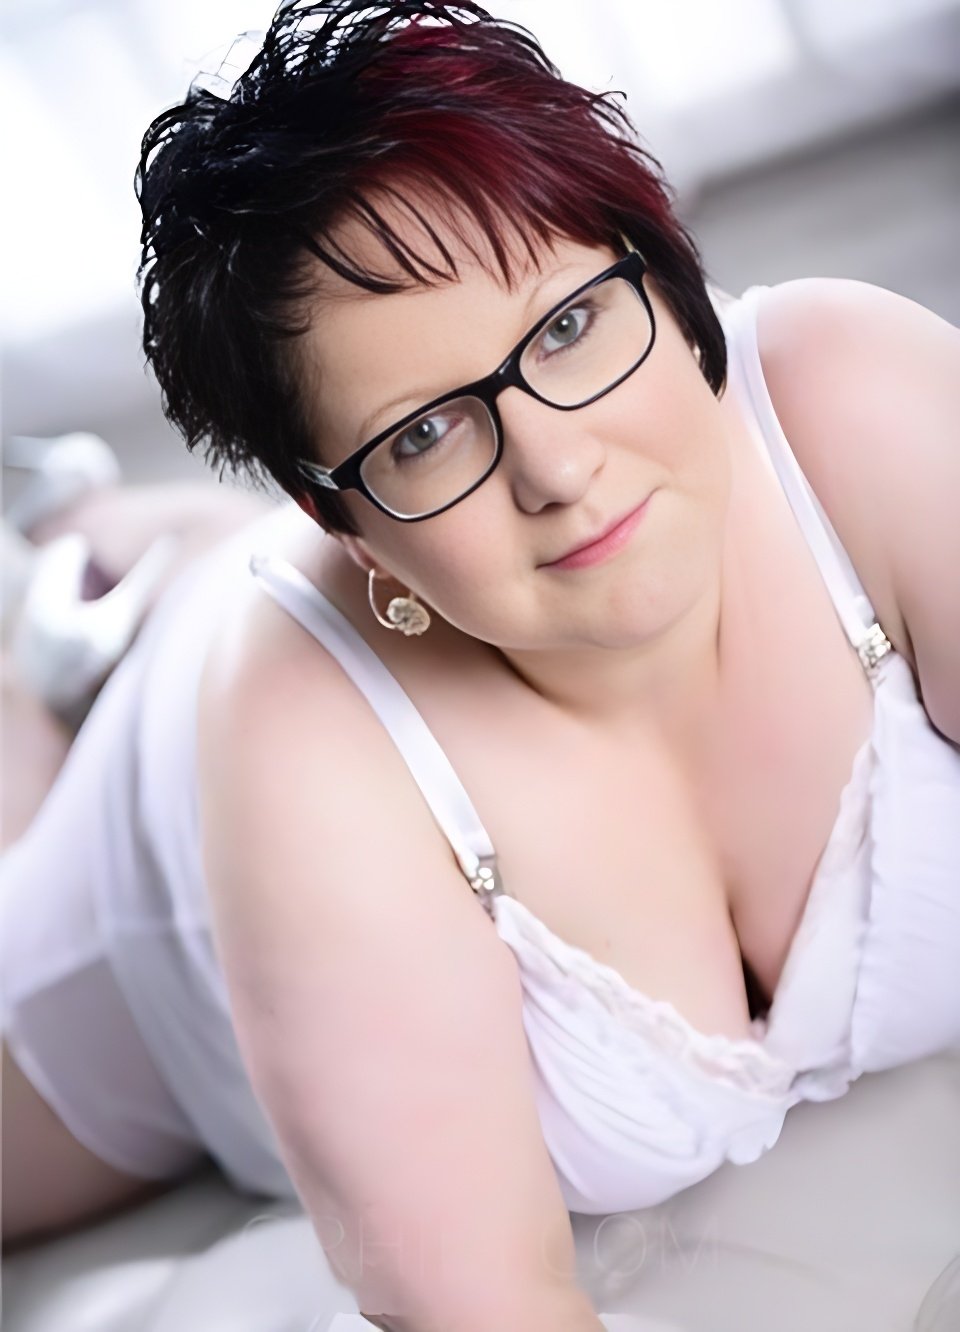 Meet Amazing Lilly (35) - Plus Size Modell: Top Escort Girl - model preview photo 1 